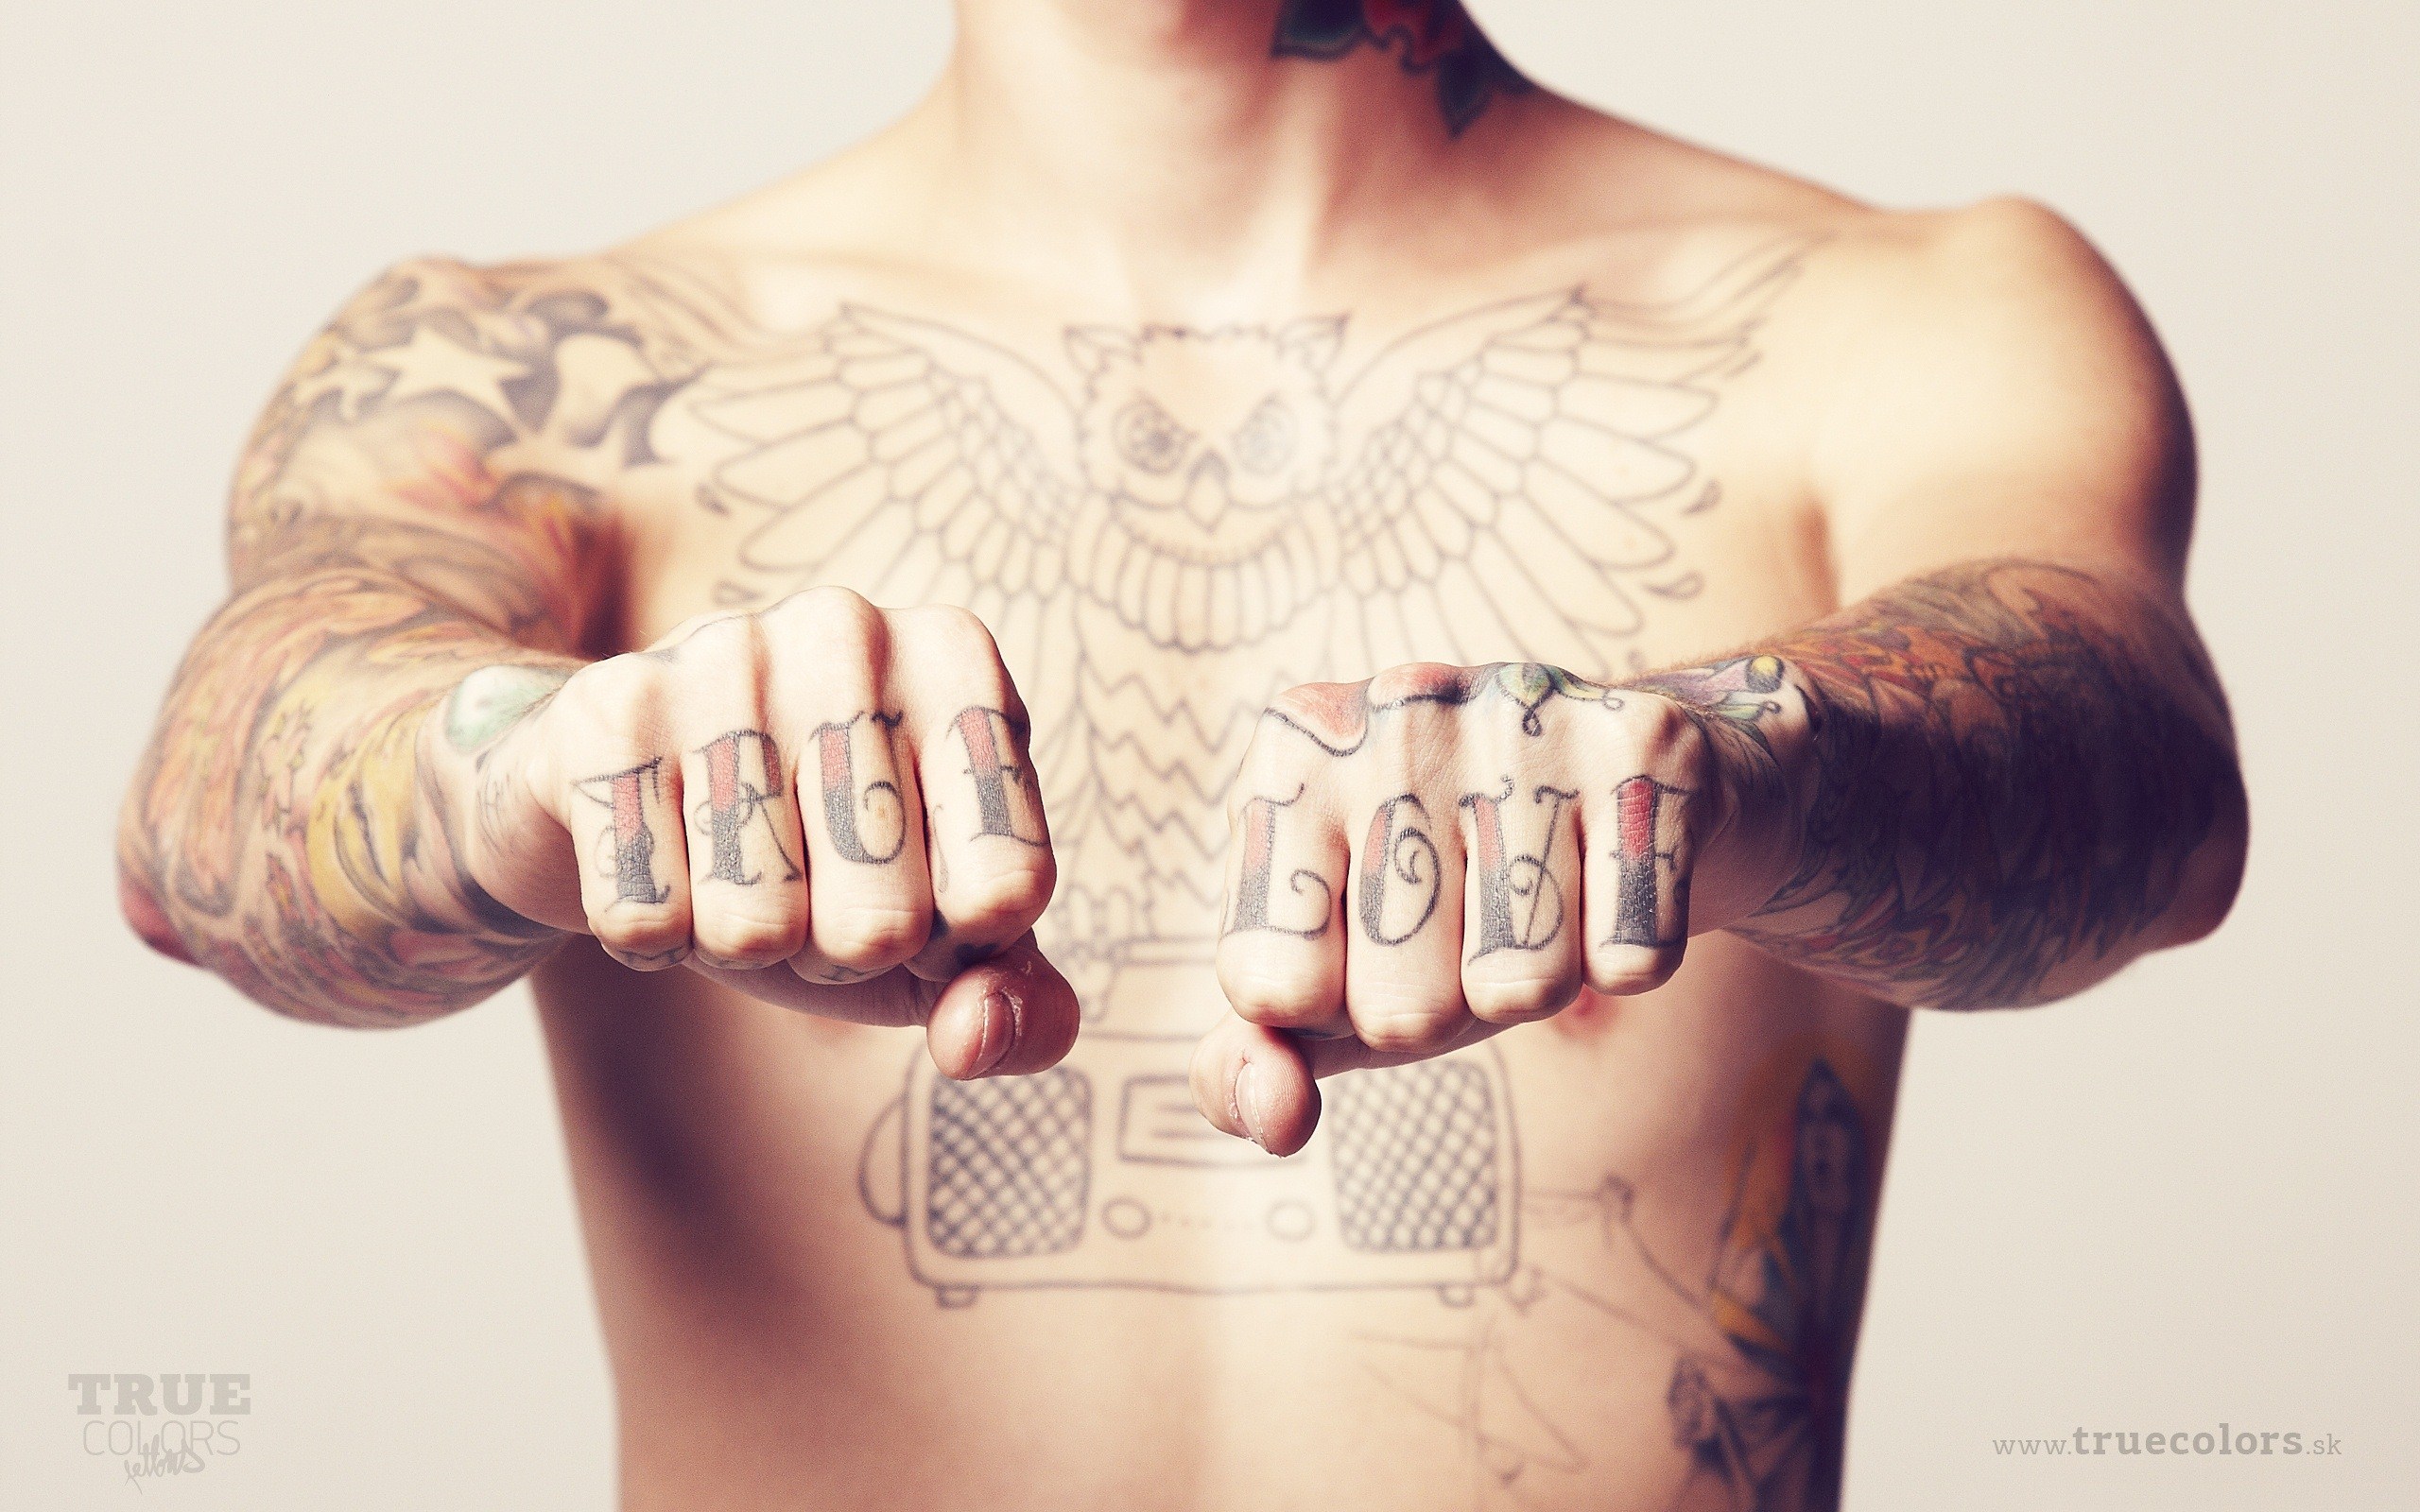 Black Outline Owl On Tattoo On Man Chest And True Love Knuckles Tattoo